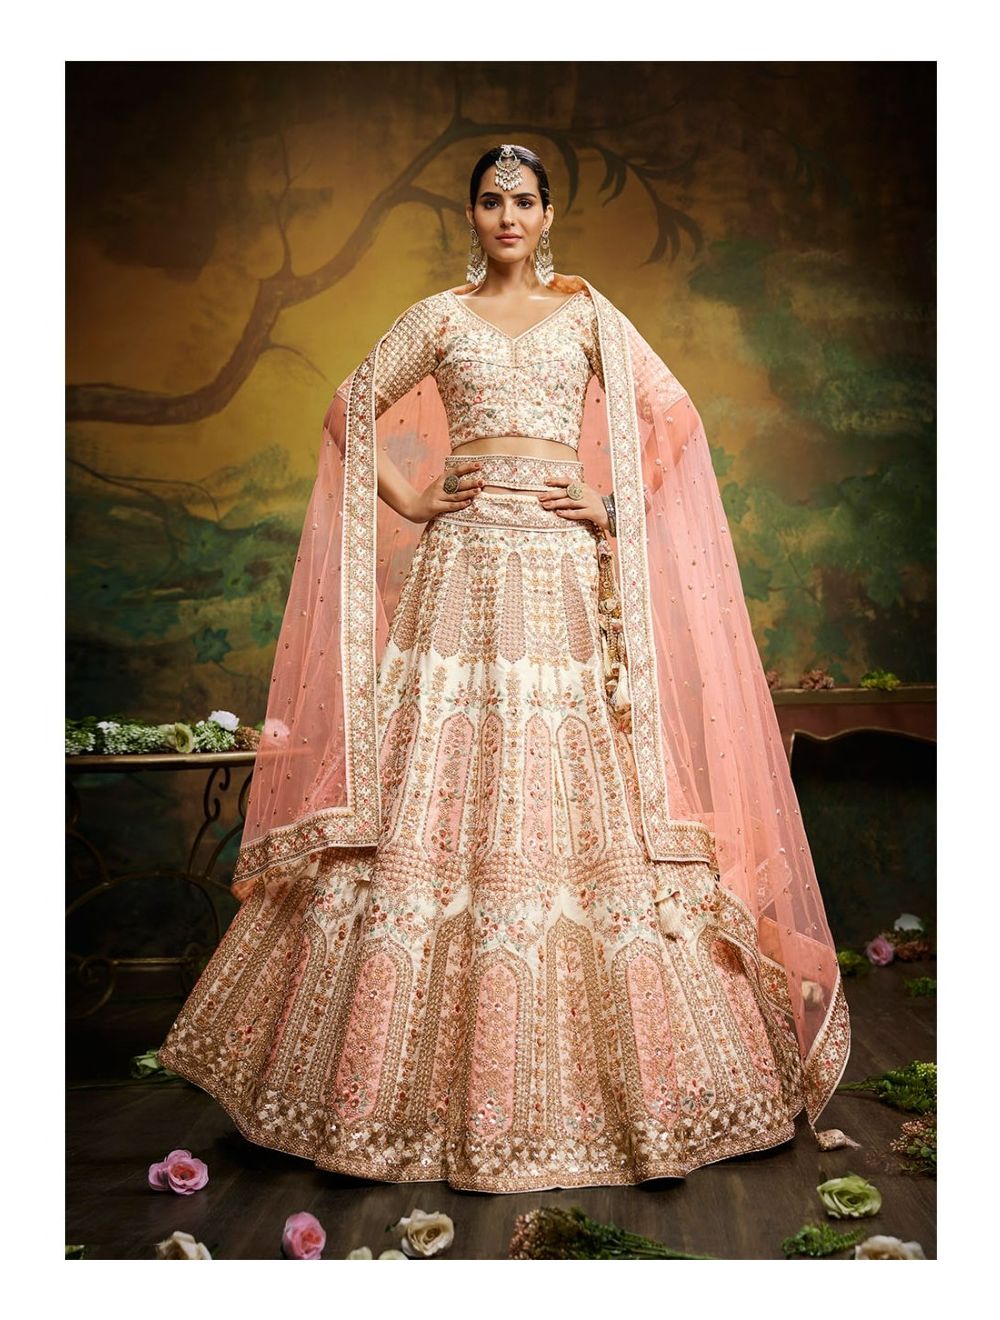 Style your Wedding Lehengas in line with the 2023 horoscope